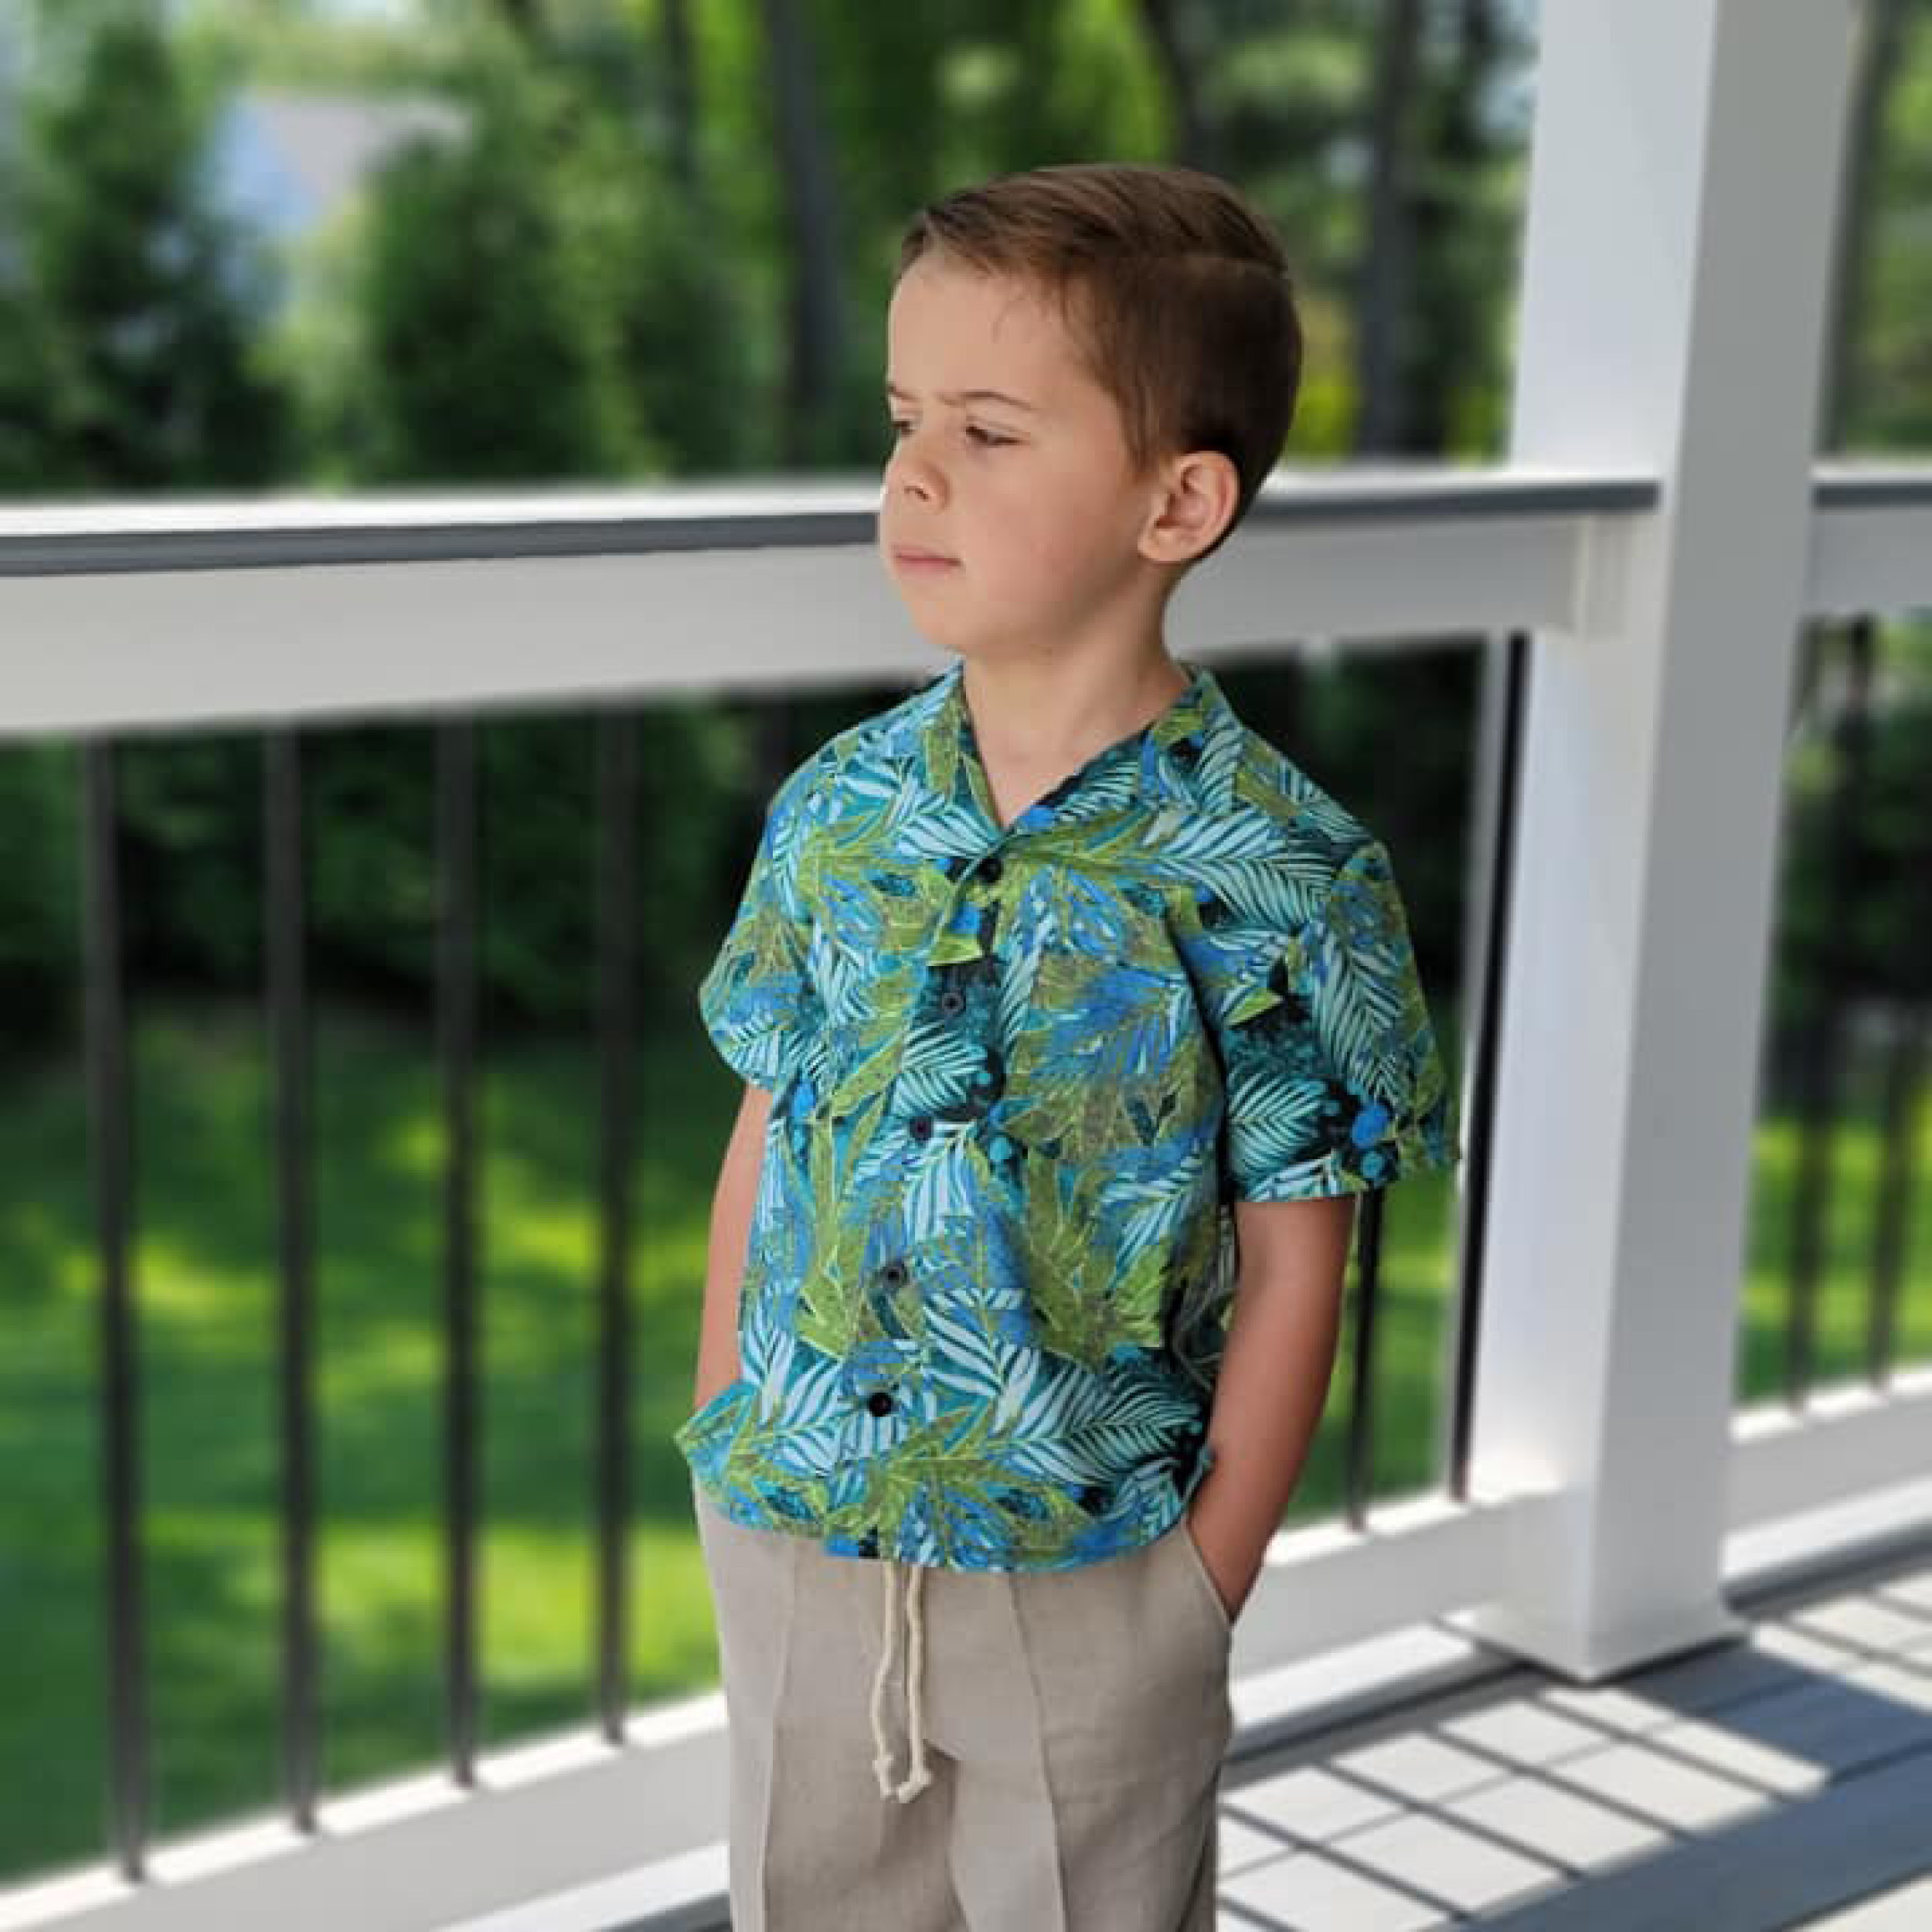 Child wearing the Children's Tropical Shirt sewing pattern from Wardrobe by Me on The Fold Line. A shirt pattern made in cotton, viscose or linen fabrics, featuring front button closure, short-sleeves, convertible collar, double yoke, two back pleats, side slits and left front breast pocket.